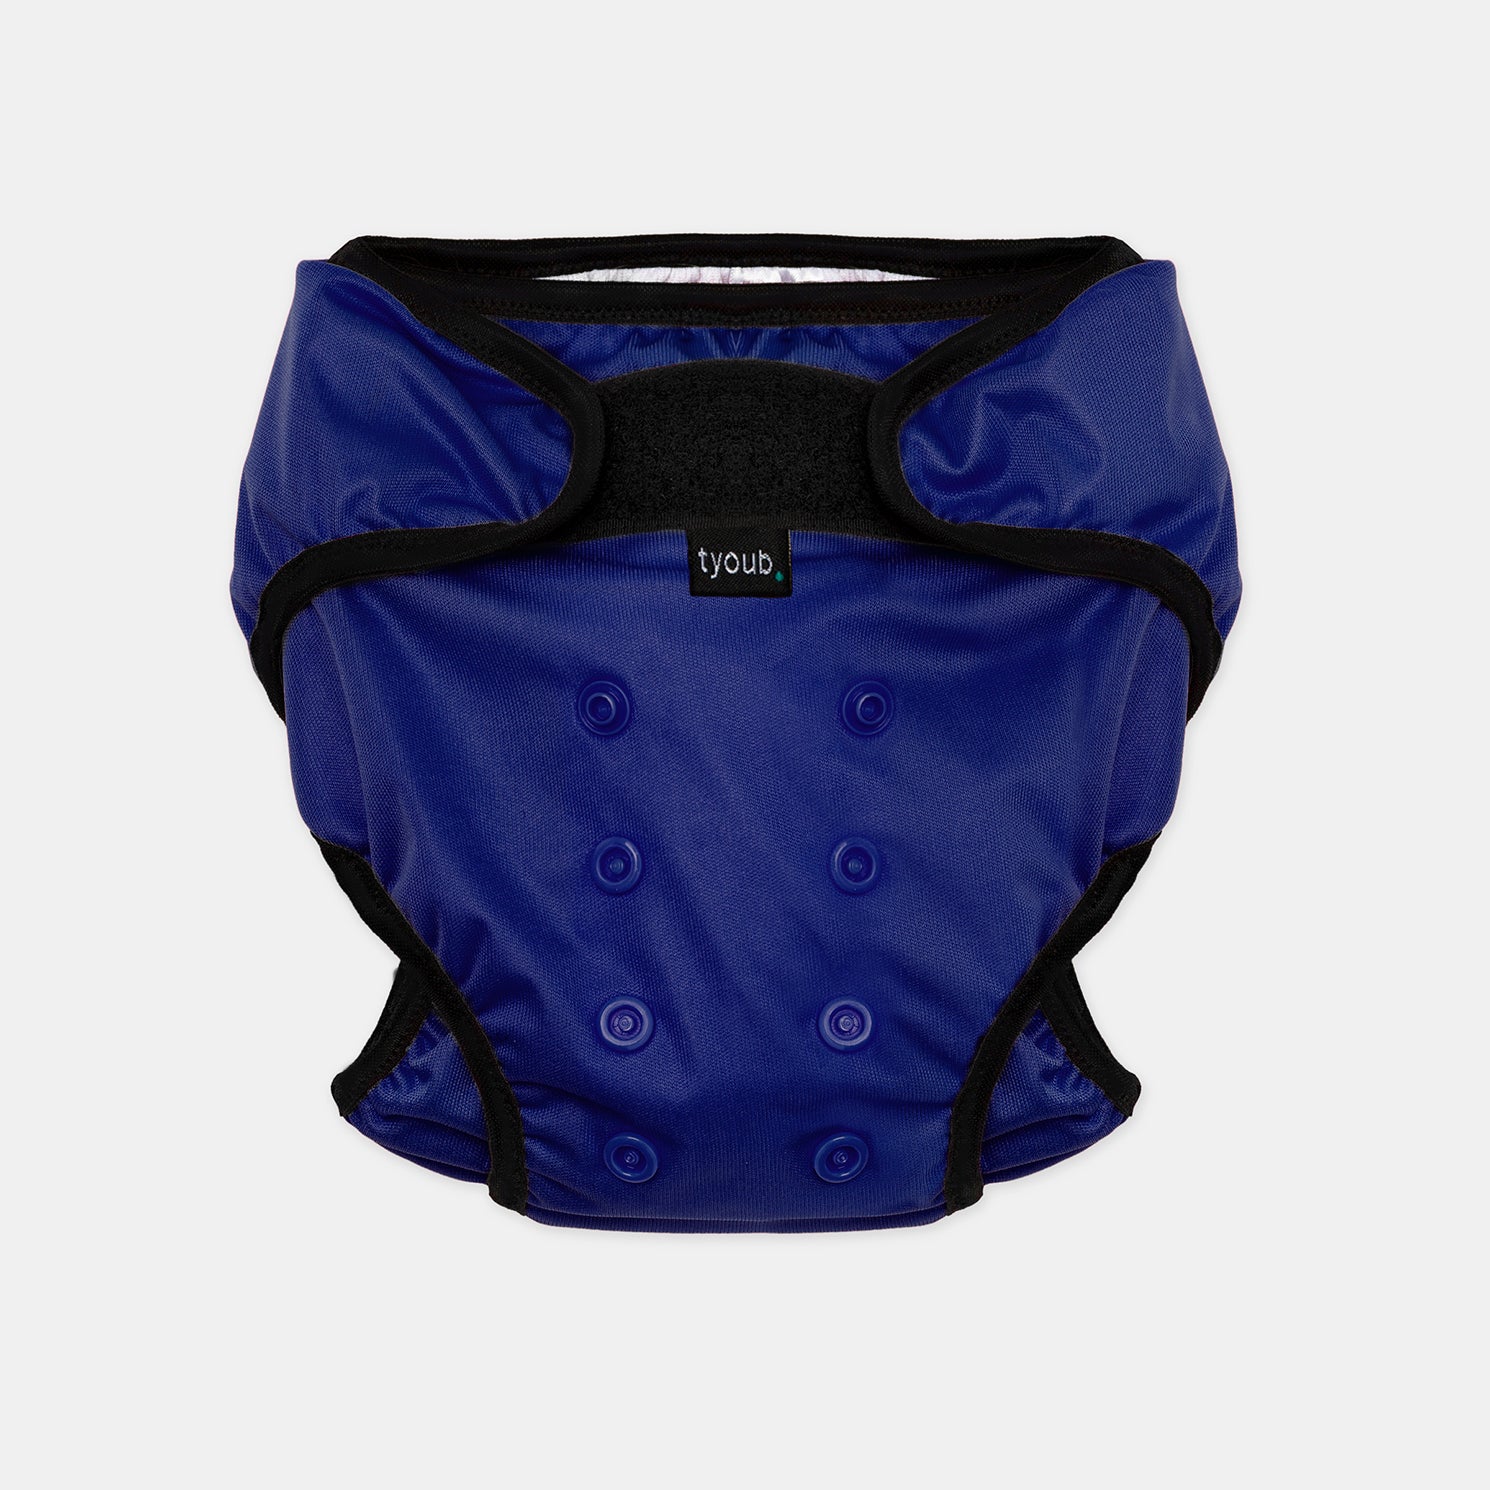 Baby & Toddler, Reusable Swim Nappy + Wet Bag - Blue front view